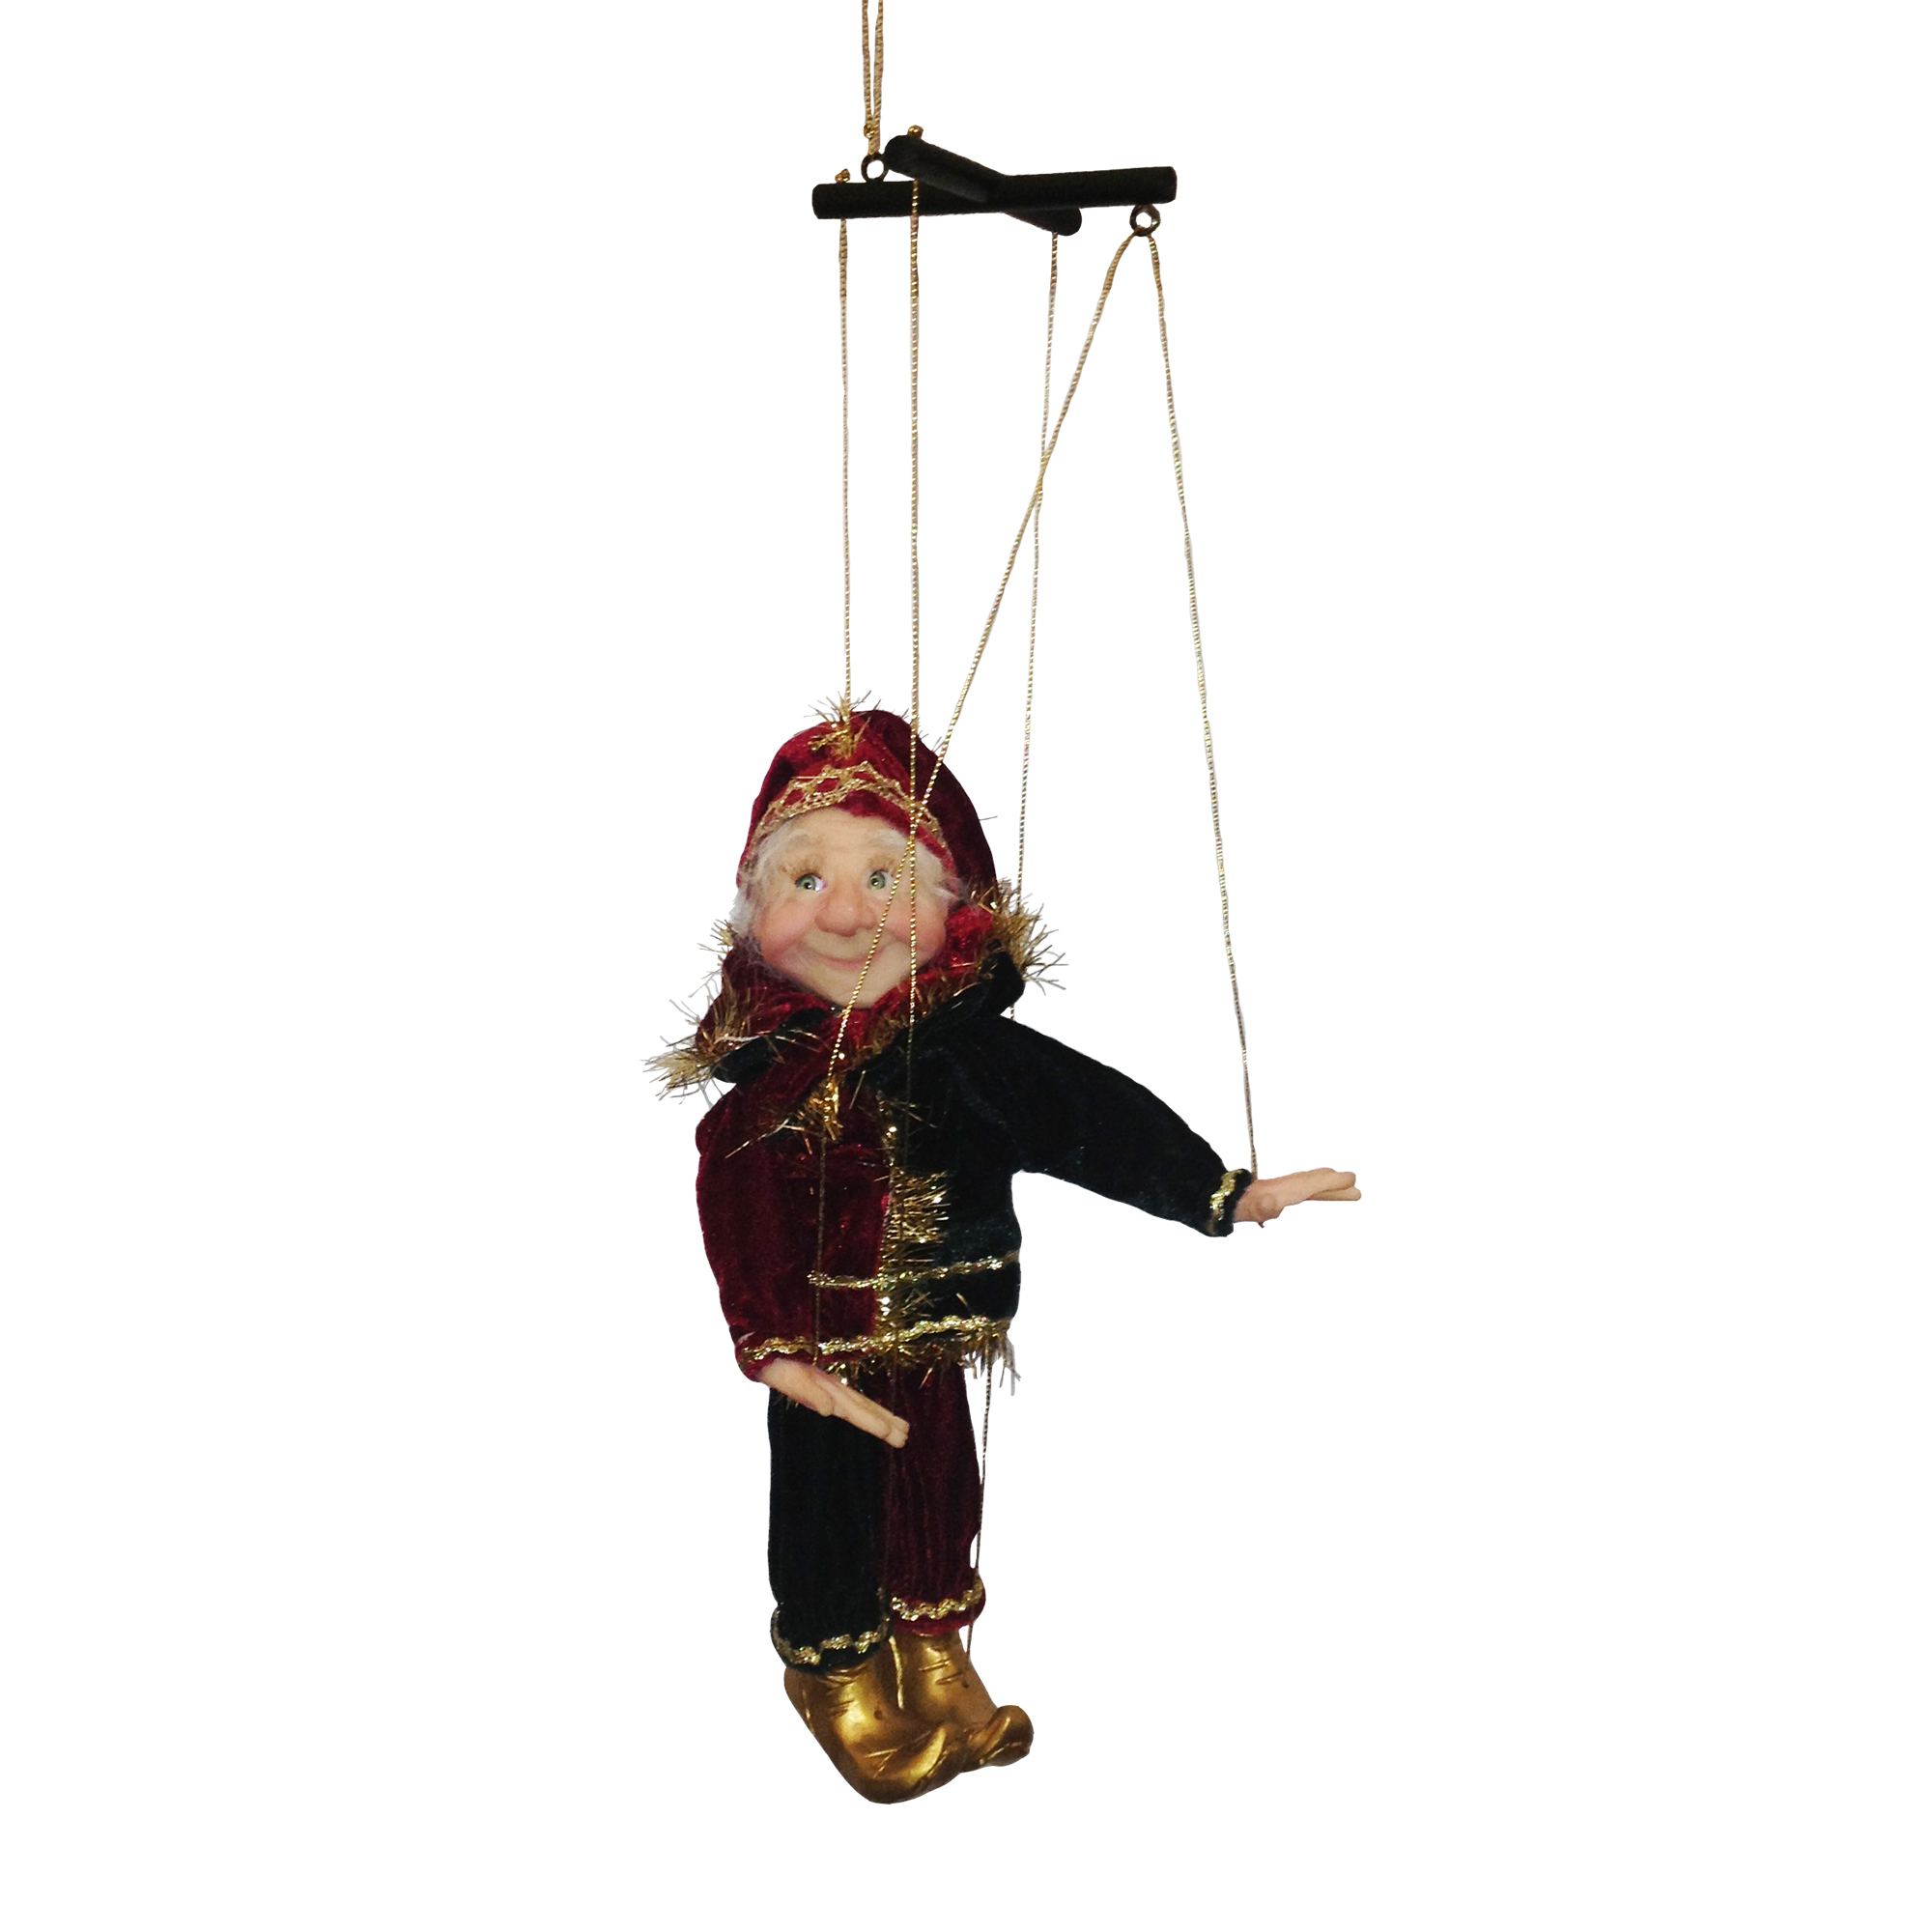 7" Jacqueline Kent Miniature Red, Green and Gold Marionette Ornament